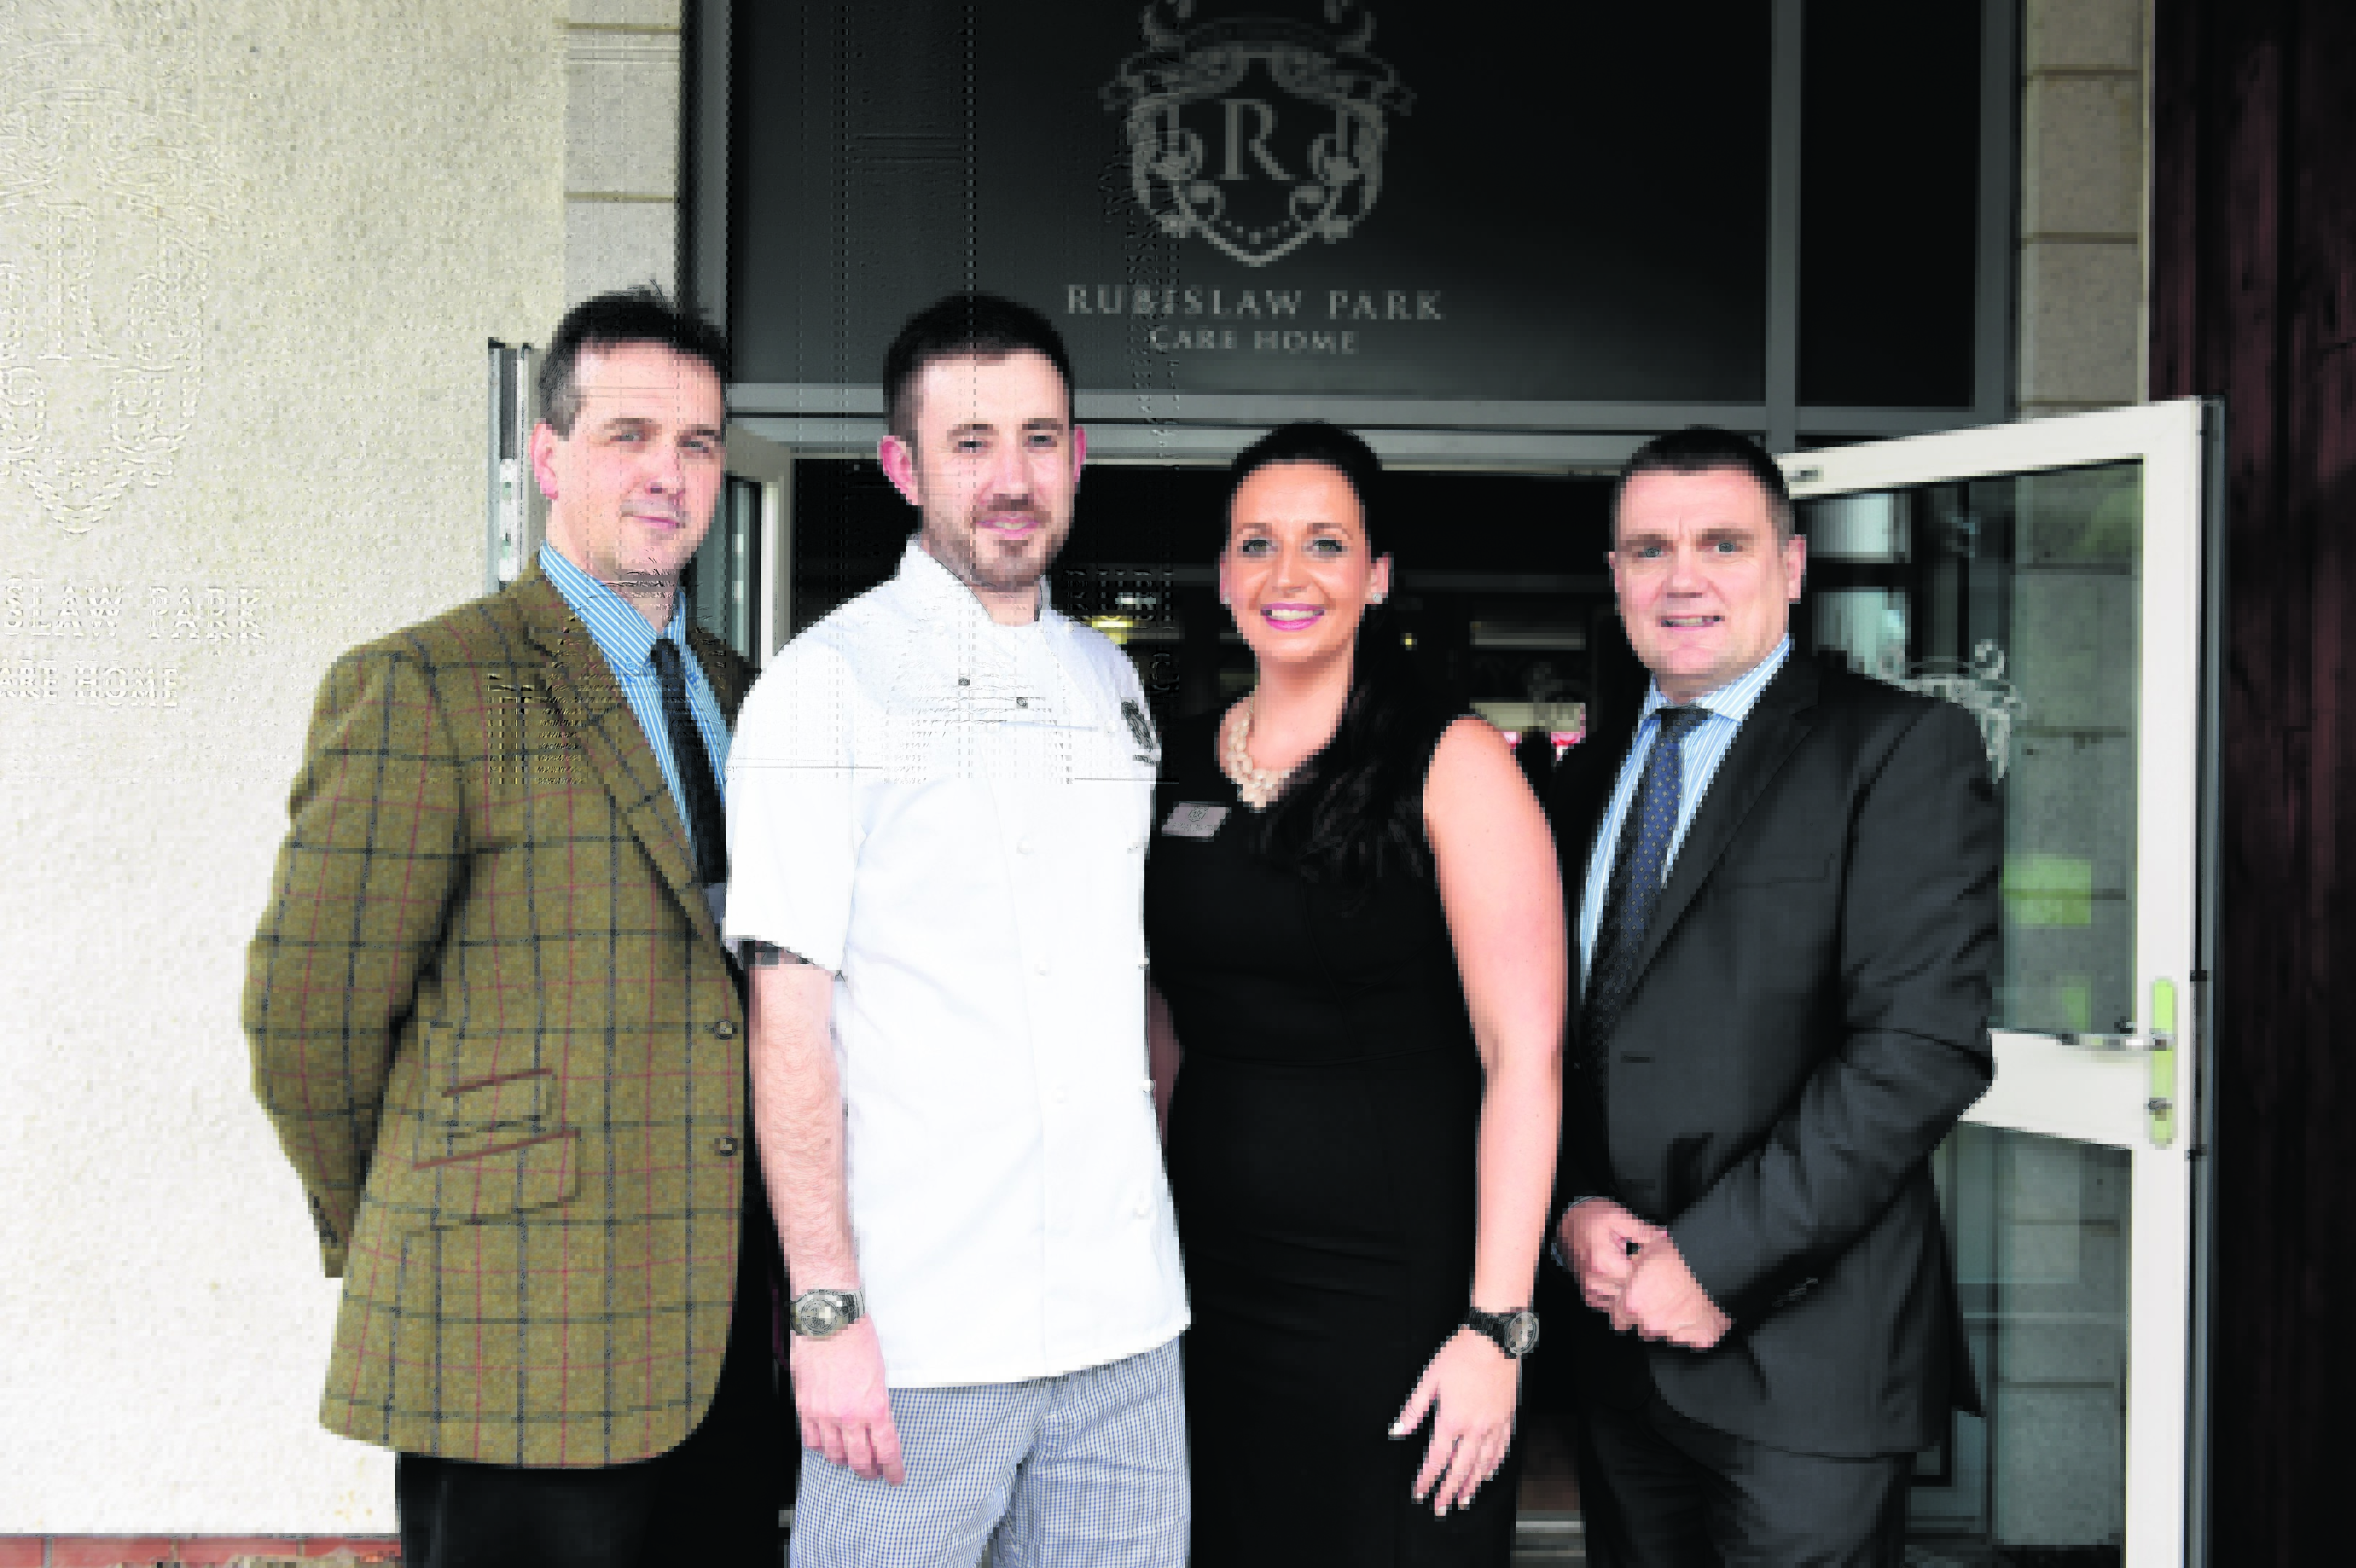 Keith Porter, general manager, Damien Jarvis, head chef, Kristin Jackson-Brown, director of care, and Paul Beaumont, managing director